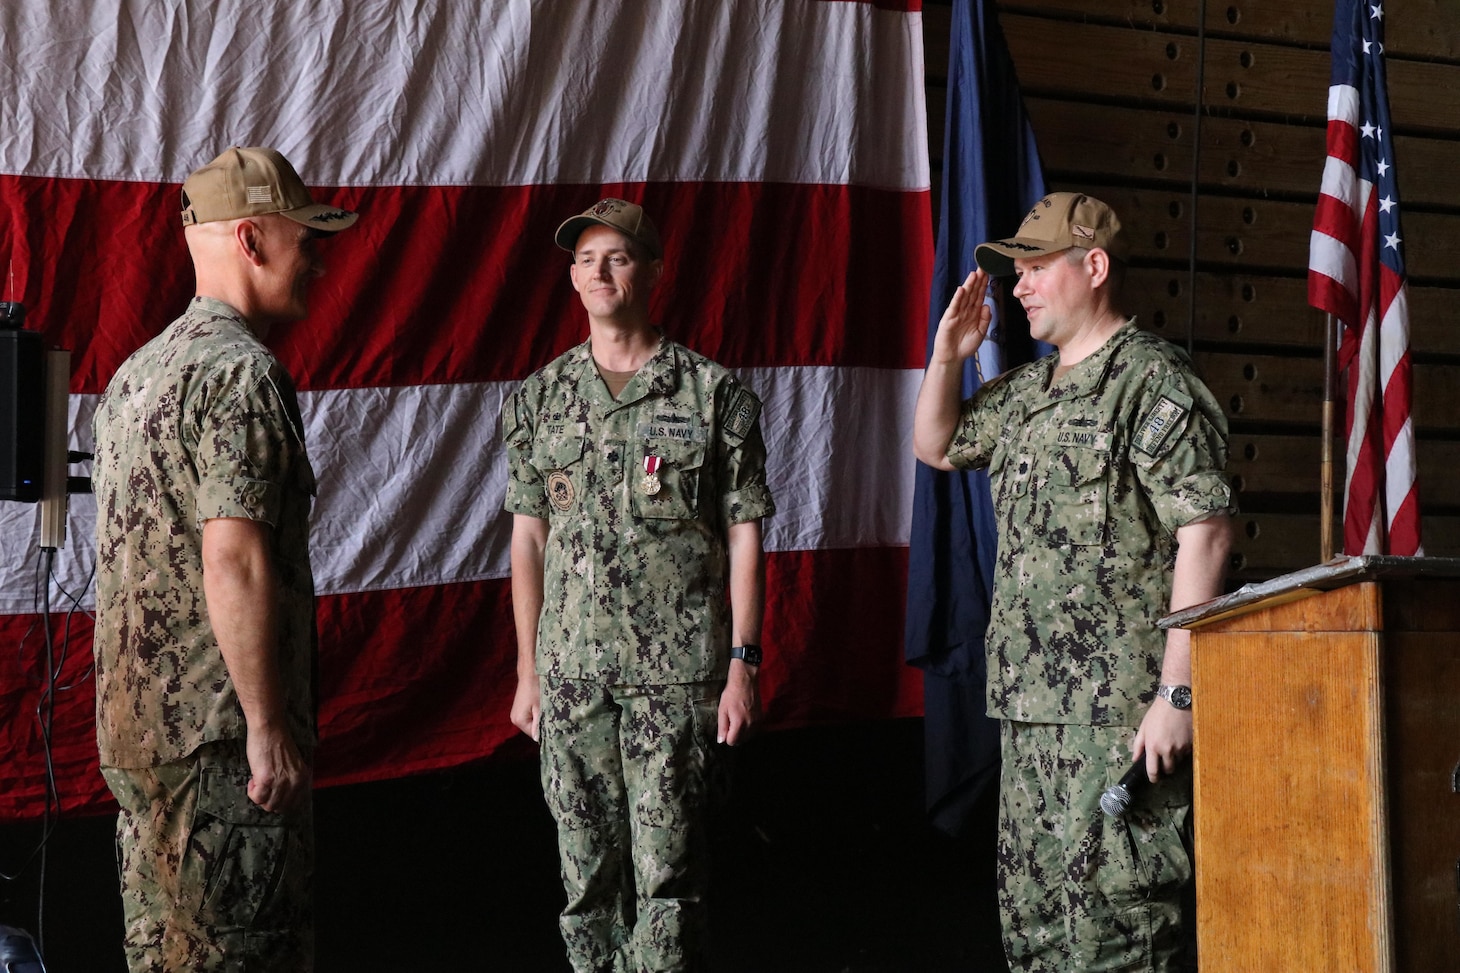 DARWIN, Australia (May 11, 2022) Cmdr. Dirk Sonnenberg, right, 22nd commanding officer of the forward-deployed amphibious dock landing ship USS Ashland (LSD 48), assumes command from Cmdr. Keith Tate, center, during Ashland’s change-of-command ceremony, May 11 in Australia. Ashland, part of Amphibious Squadron 11, is operating in the U.S. 7th Fleet area of responsibility to enhance interoperability with allies and partners, and serve as a ready response force to defend peace and stability in the Indo-Pacific region. (U.S. Navy photo by Lt. j.g. John Malik)